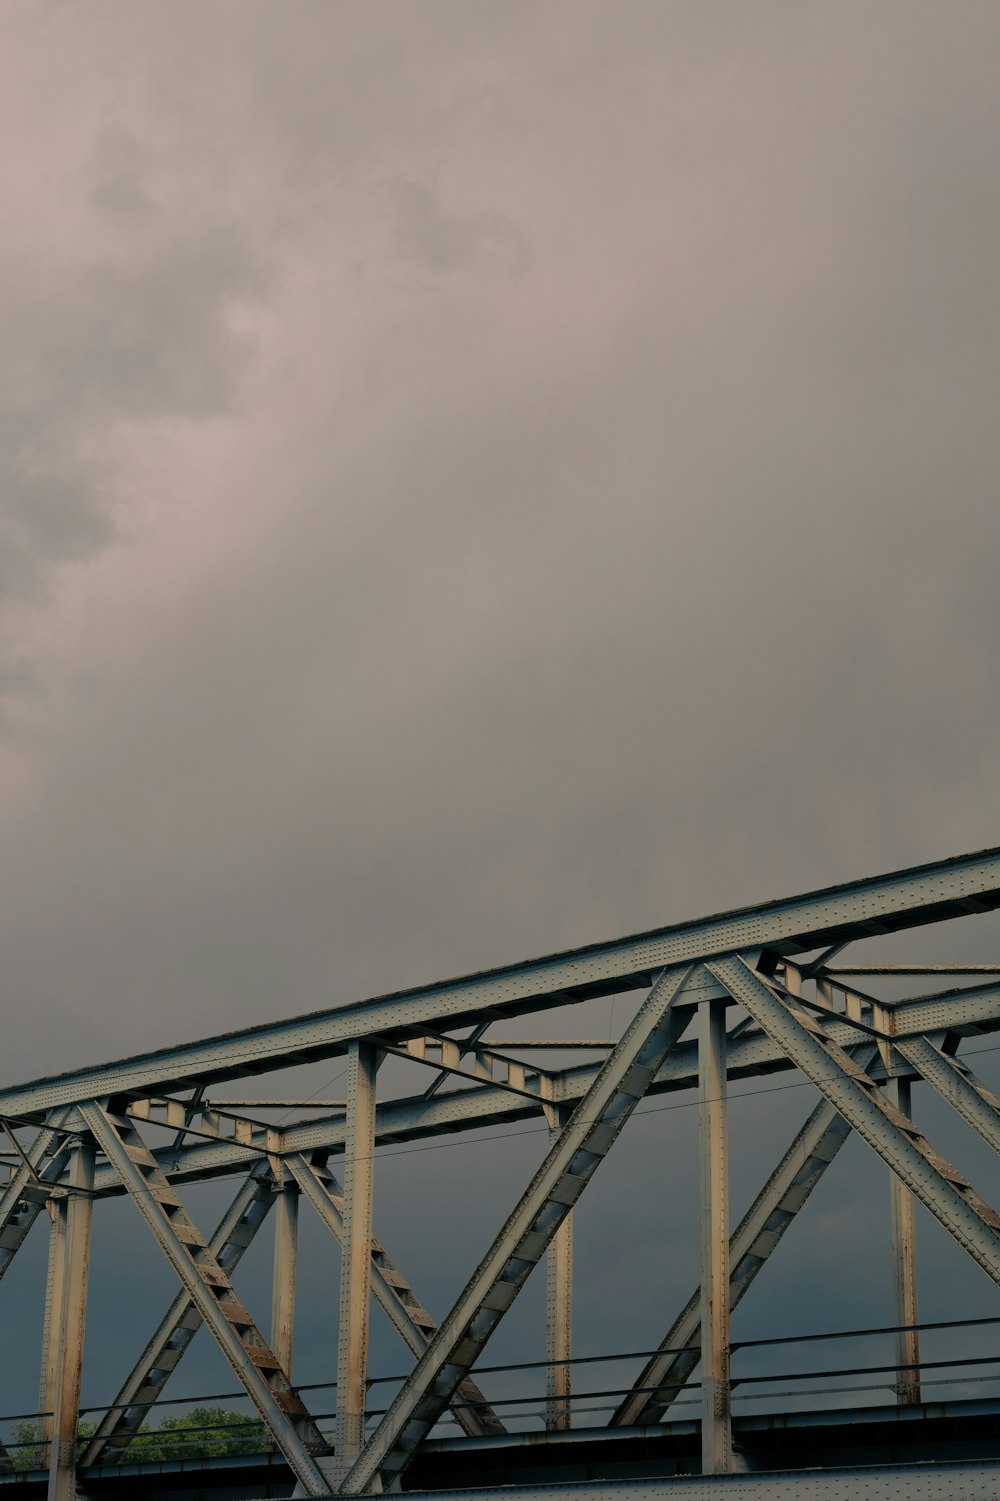 an airplane flying over a bridge on a cloudy day